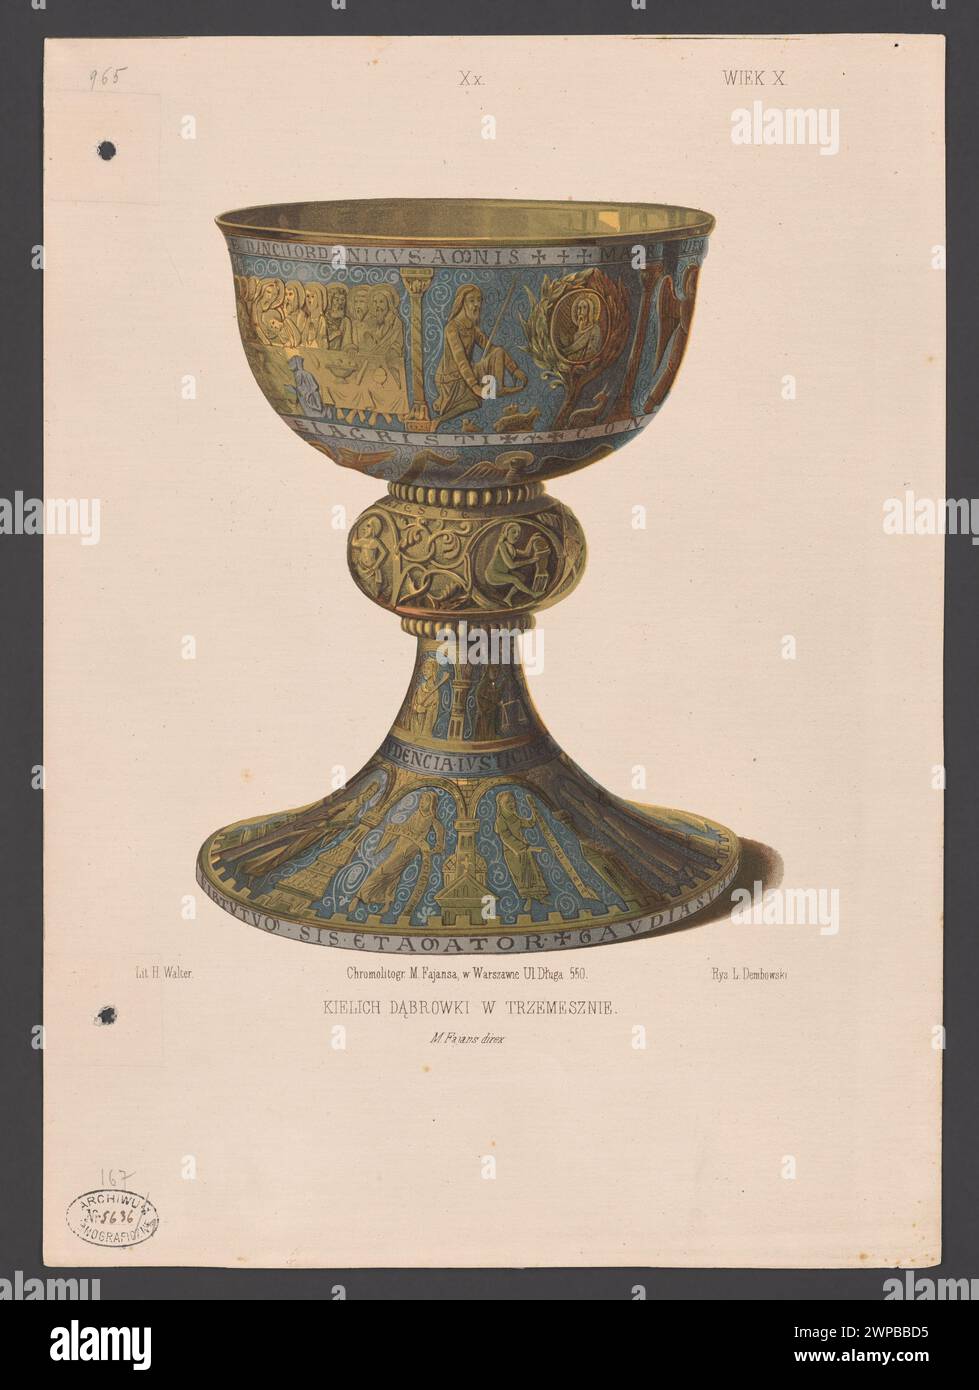 The cup of D Bowki in Trzemeszno, il. Z: Aleksander Przedziecki, Edward Rastawiecki, 'Patterns of the Medaline Arts and from the Rebirth Age after the end of the 17th century in former Poland' (Warsaw, Paris, 1853-1855), Series 1, tab. XX; Dembowski, Leon (1823-1904), Walter, H., Fajans, Maksymilian (Warsaw; lithographic and photographic inn; 1853-1892), Fajans, Maksymilian (1825-1890), Przedziecki, Aleksander (1814-1871), Rastawiecki, Edward (1804-1874), Unger, Józef (Warsaw; Drukarnia, Publisher, Ksi Garnia; 1841-Ca 1877); 1853-1855 (1853-00-00-1855-00-00); Stock Photo